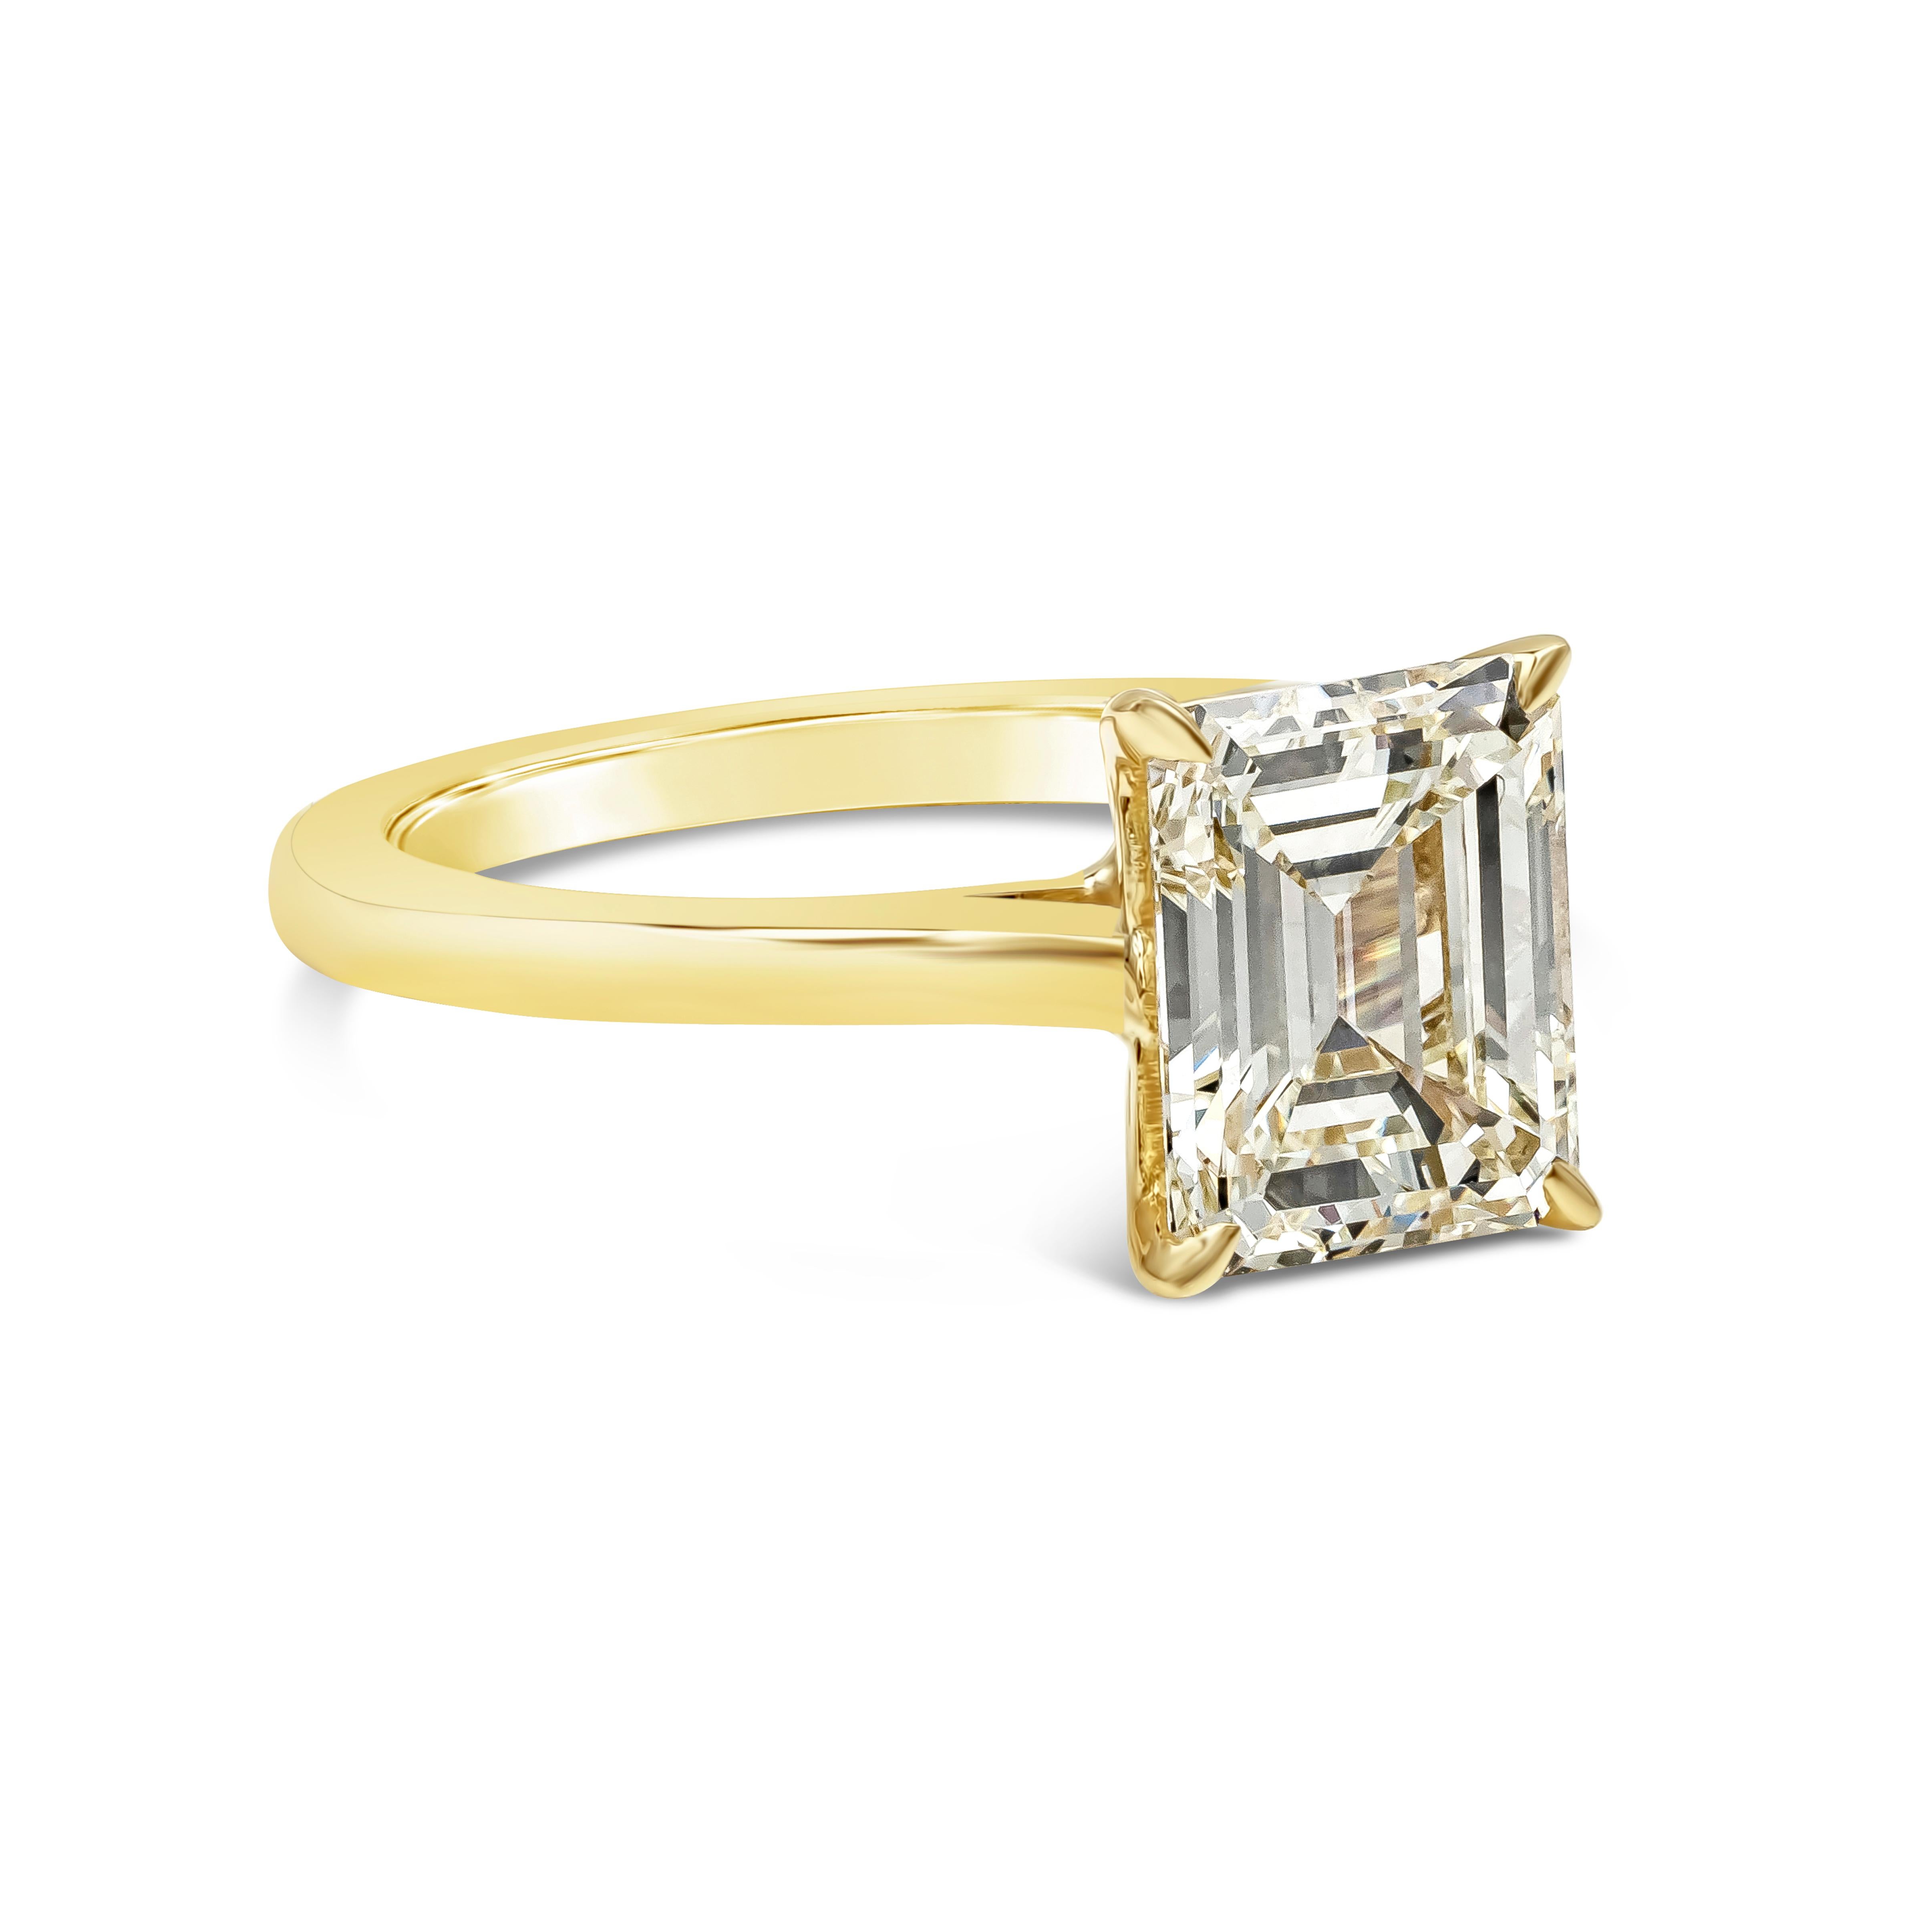 A classic solitaire engagement ring showcasing a 2.30 carat emerald cut diamond certified by GIA as M color, VVS2 clarity. Diamond is set on a polished 18k yellow gold mounting. Size 6 US (sizable upon request).

Style available in different price